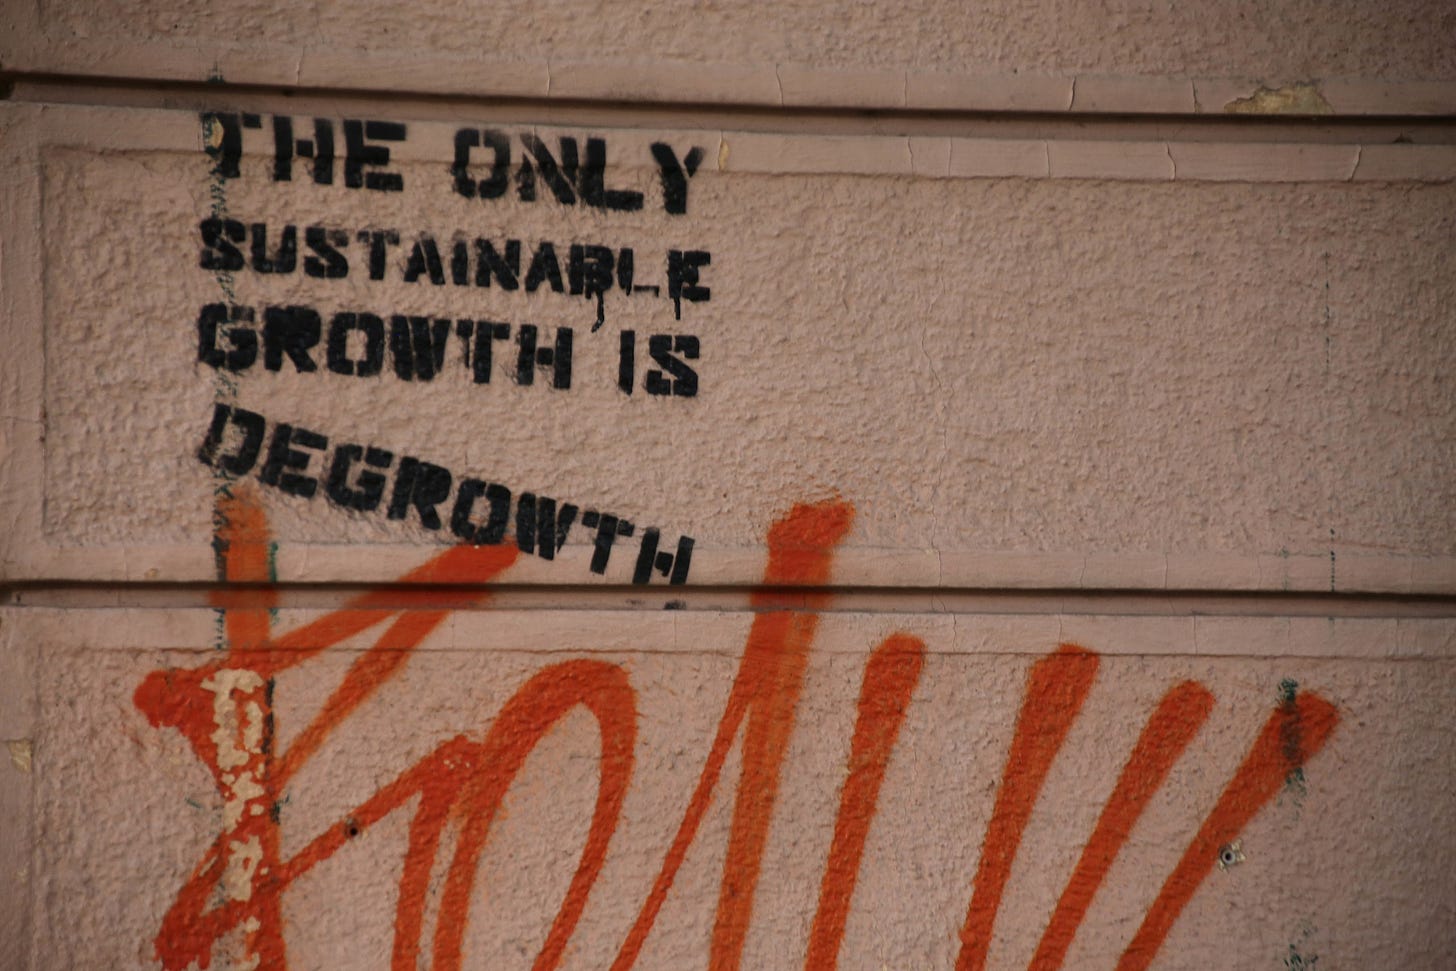 Graffiti on wall that says 'The only sustainable growth is degrowth'